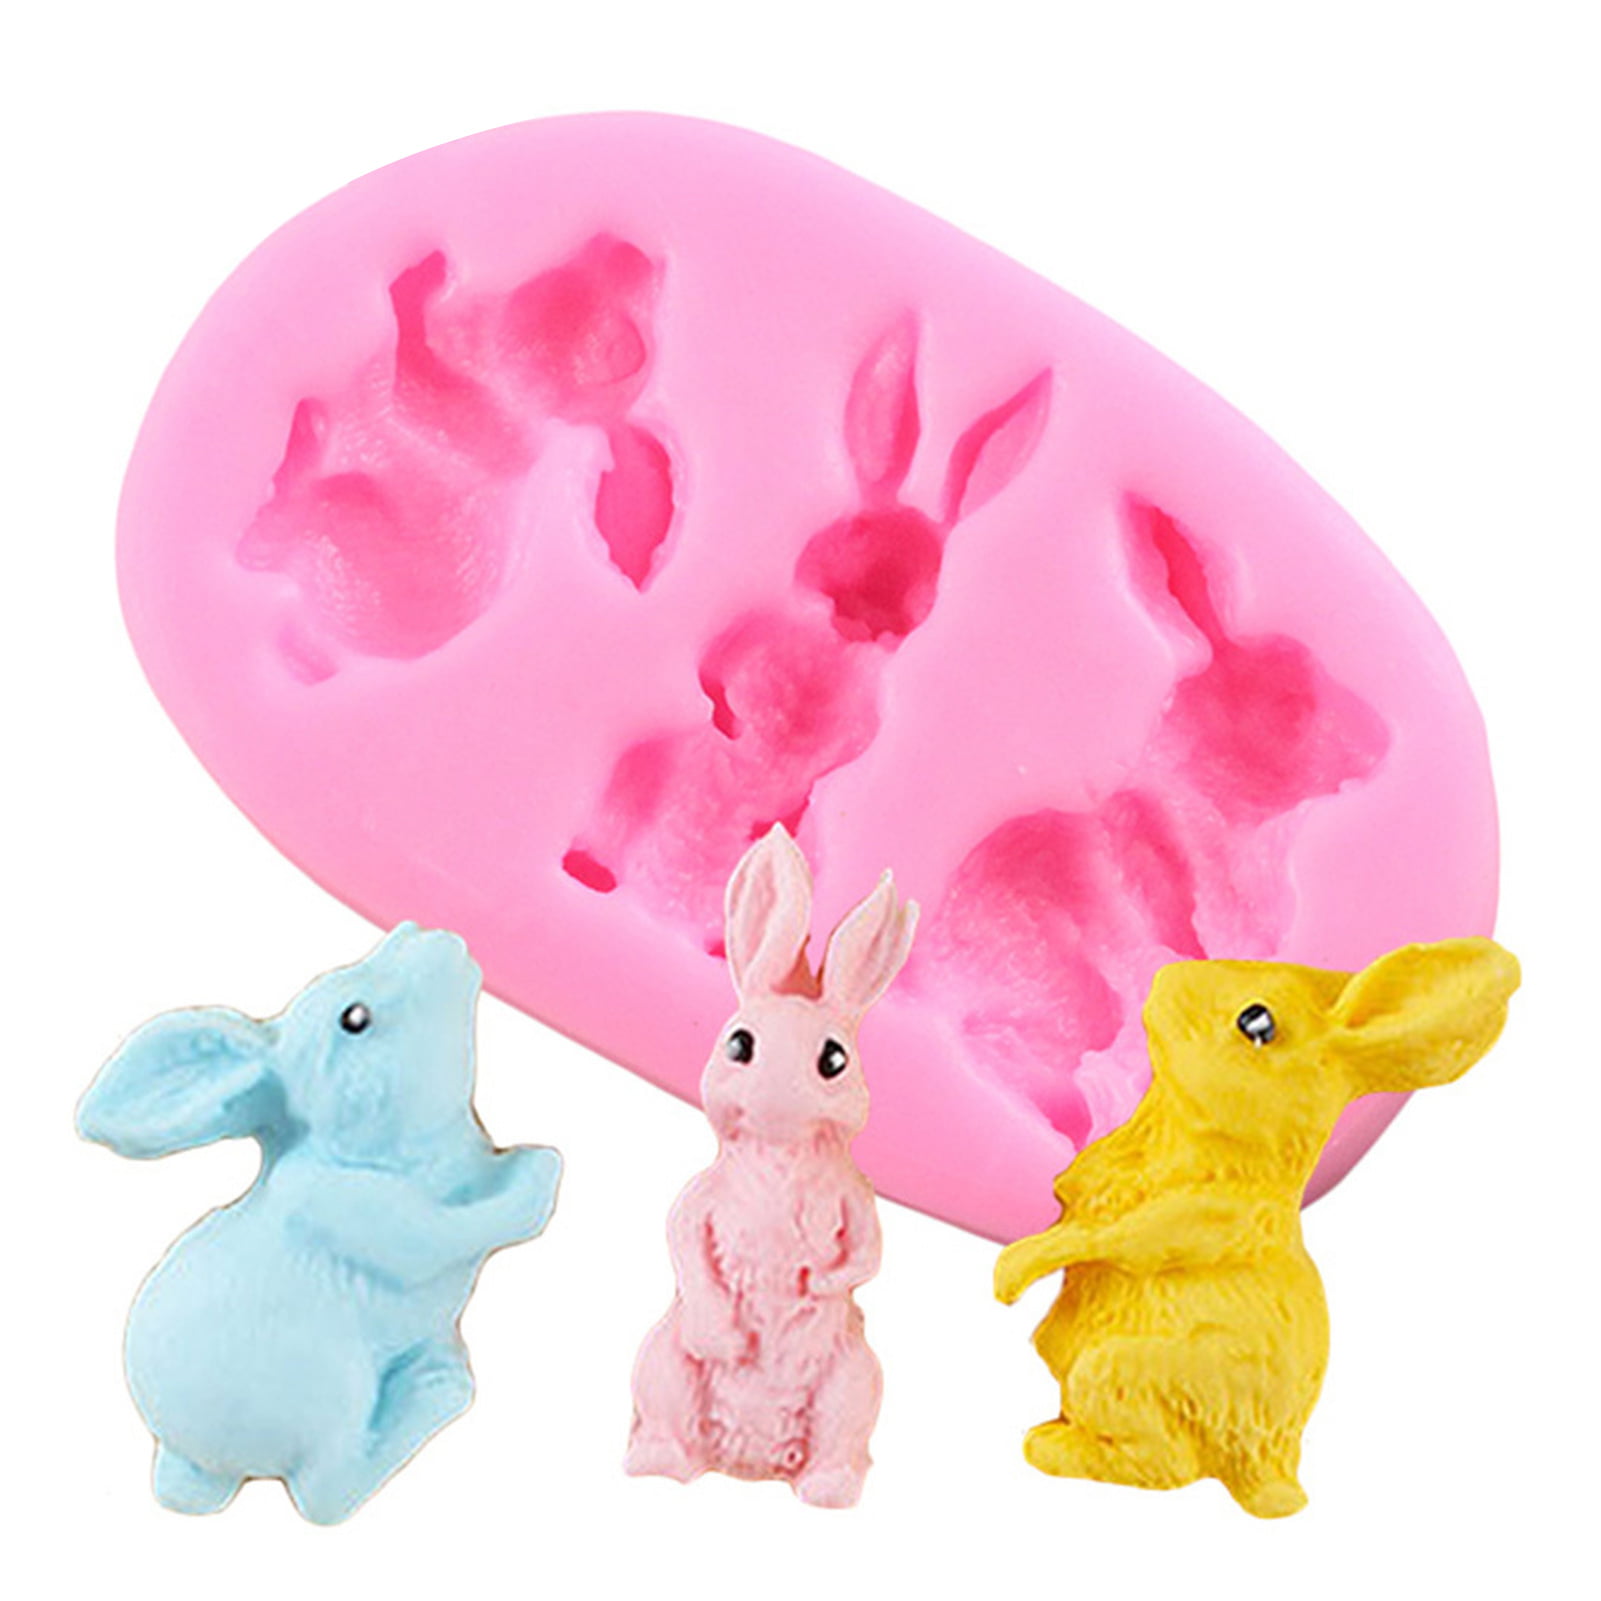 Easter Rabbit Cookie Mould Soap Decorating Mold Cute Fondant Mold DIY Cake Maker Silicone Decorating Baking Tool 